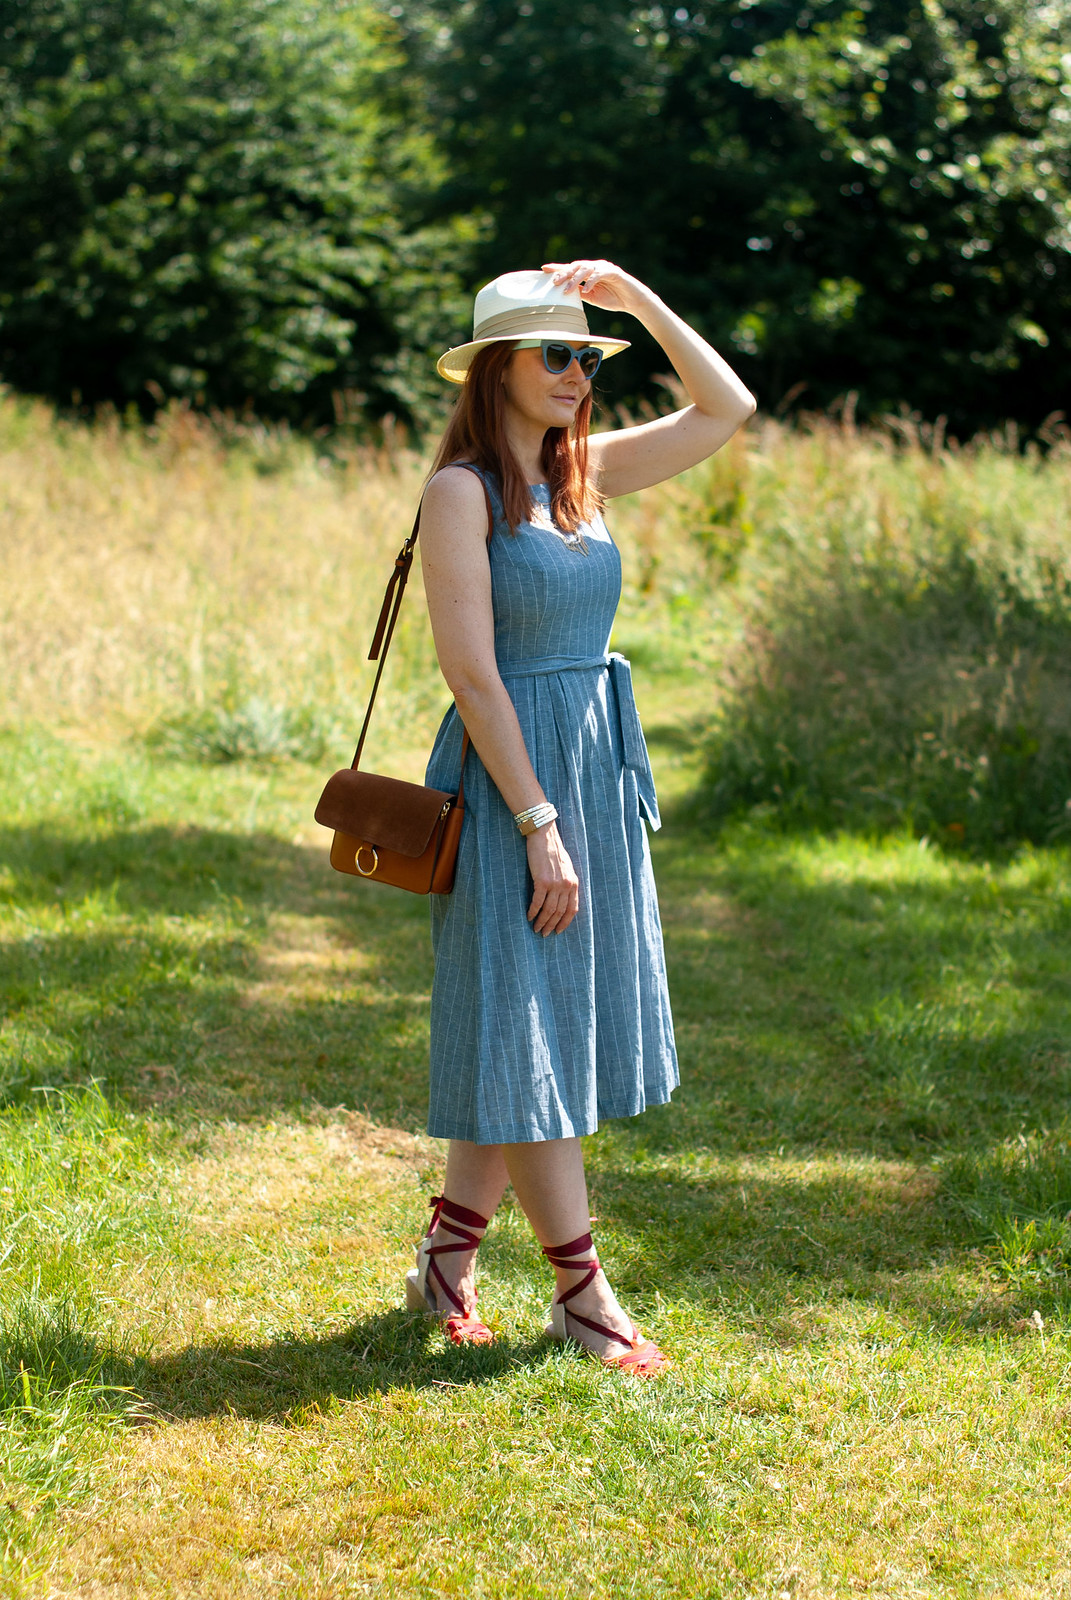 A Lightweight Chambray Dress Perfect for Summer \ styled with a cream Panama hat, tan crossbody bag, red wedge espadrilles and blue cat eye sunglasses | Not Dressed As Lamb, over 40 fashion